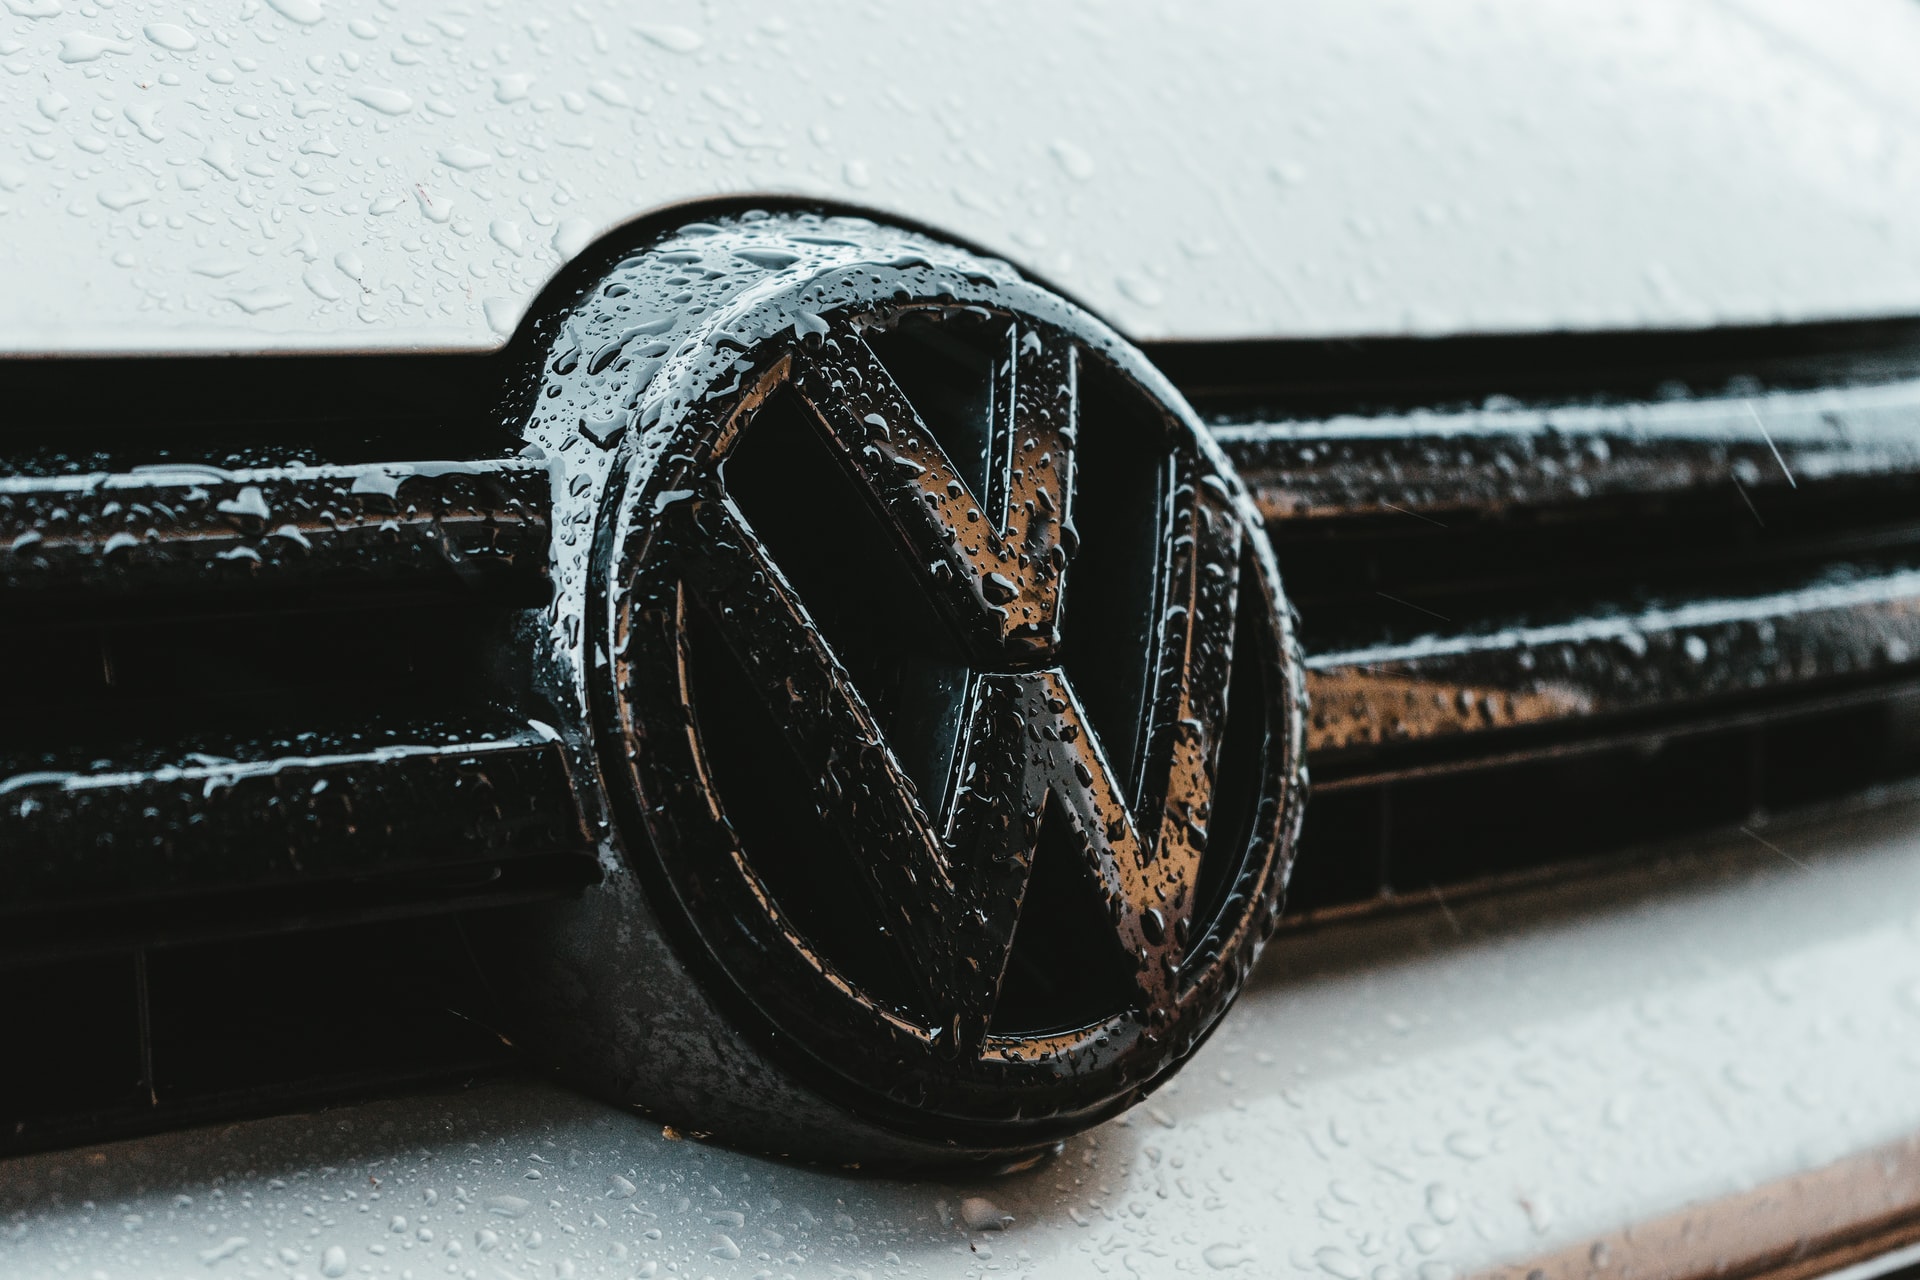 You are currently viewing Tattoo Popularity Ranks Volkswagen As the Most Frequent on Instagram